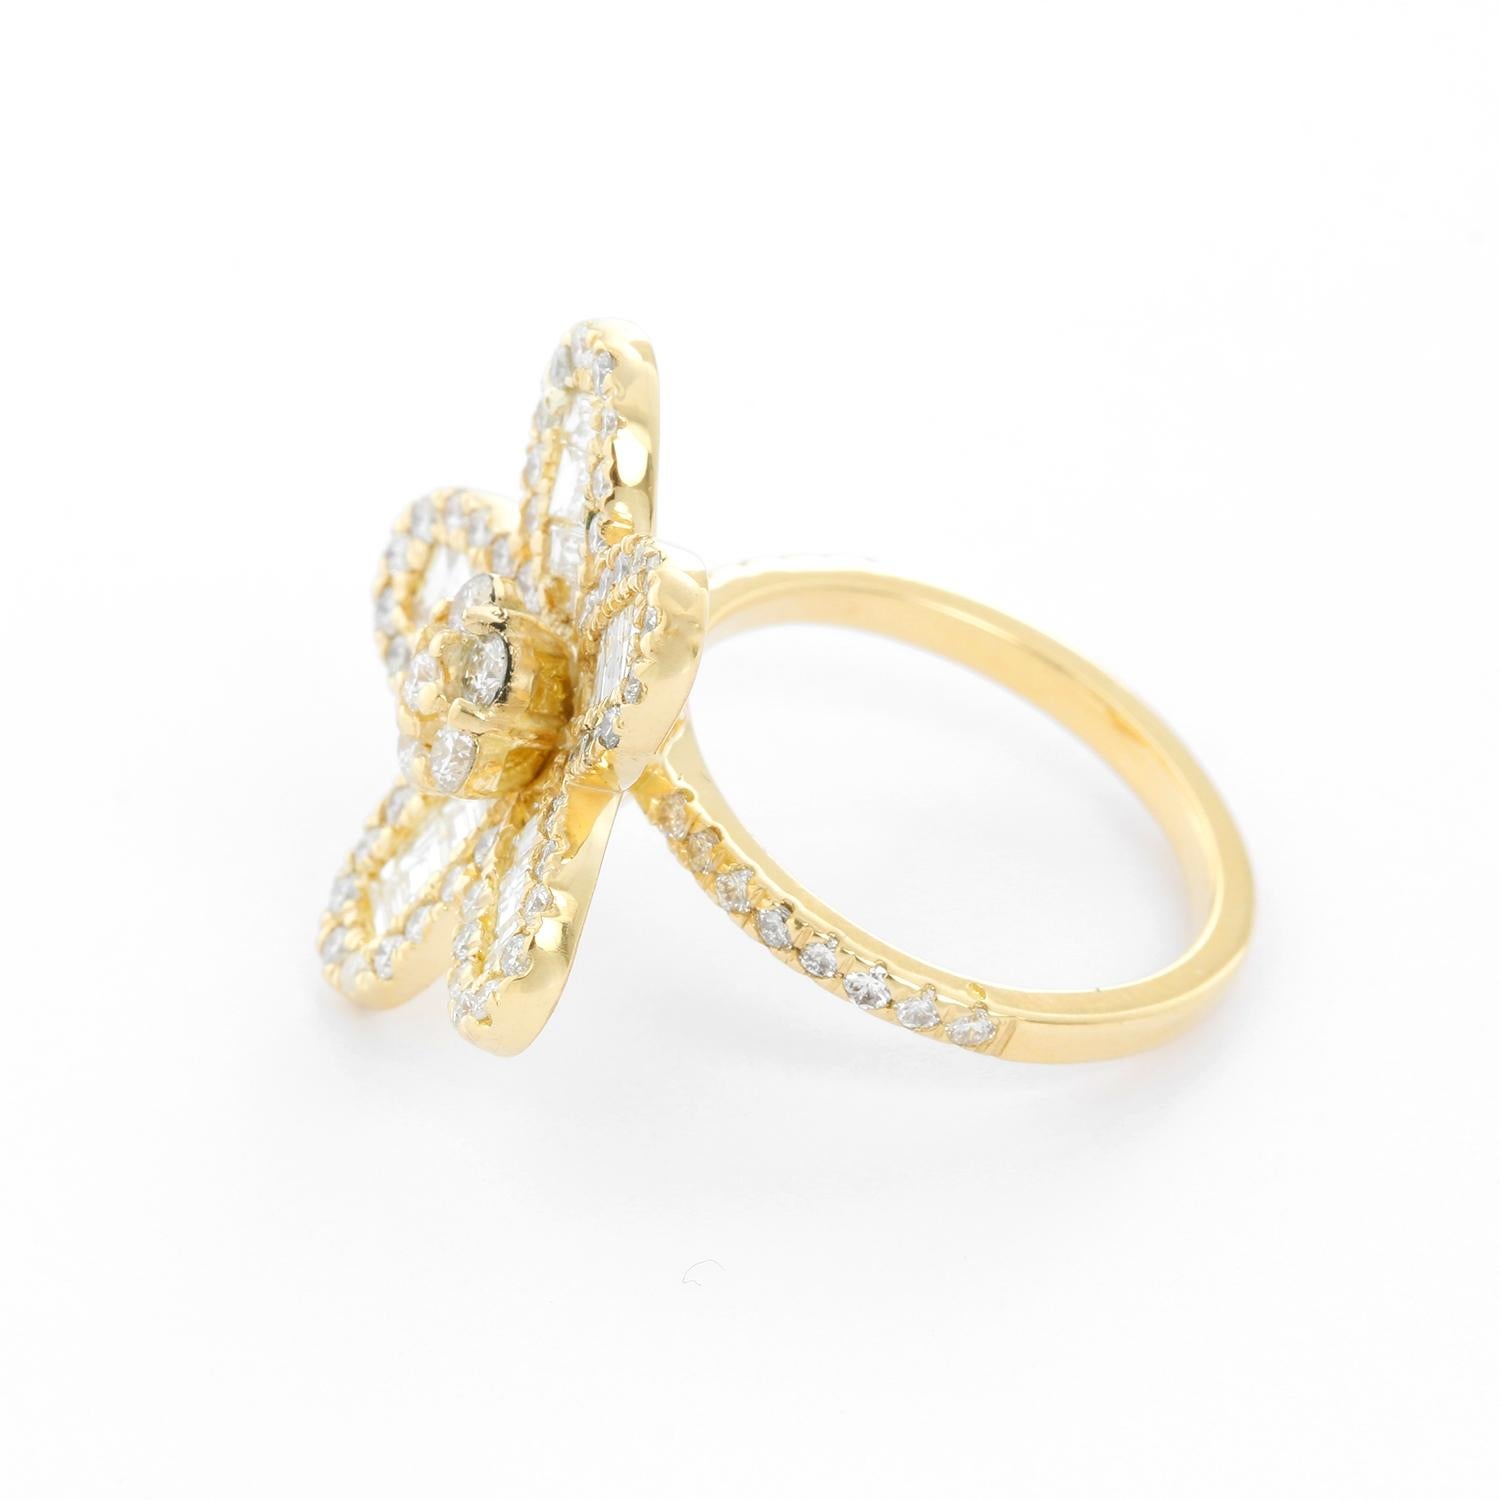 14K Yellow Gold Flower Diamond Ring Size 7 1/4 - Beautiful round brilliant diamonds and baguette cut diamonds  weighing 2 cts. Color G-H. Clarity SI/VS. Set in 14K Yellow gold with diamonds on the side. This is truly a stunning piece.